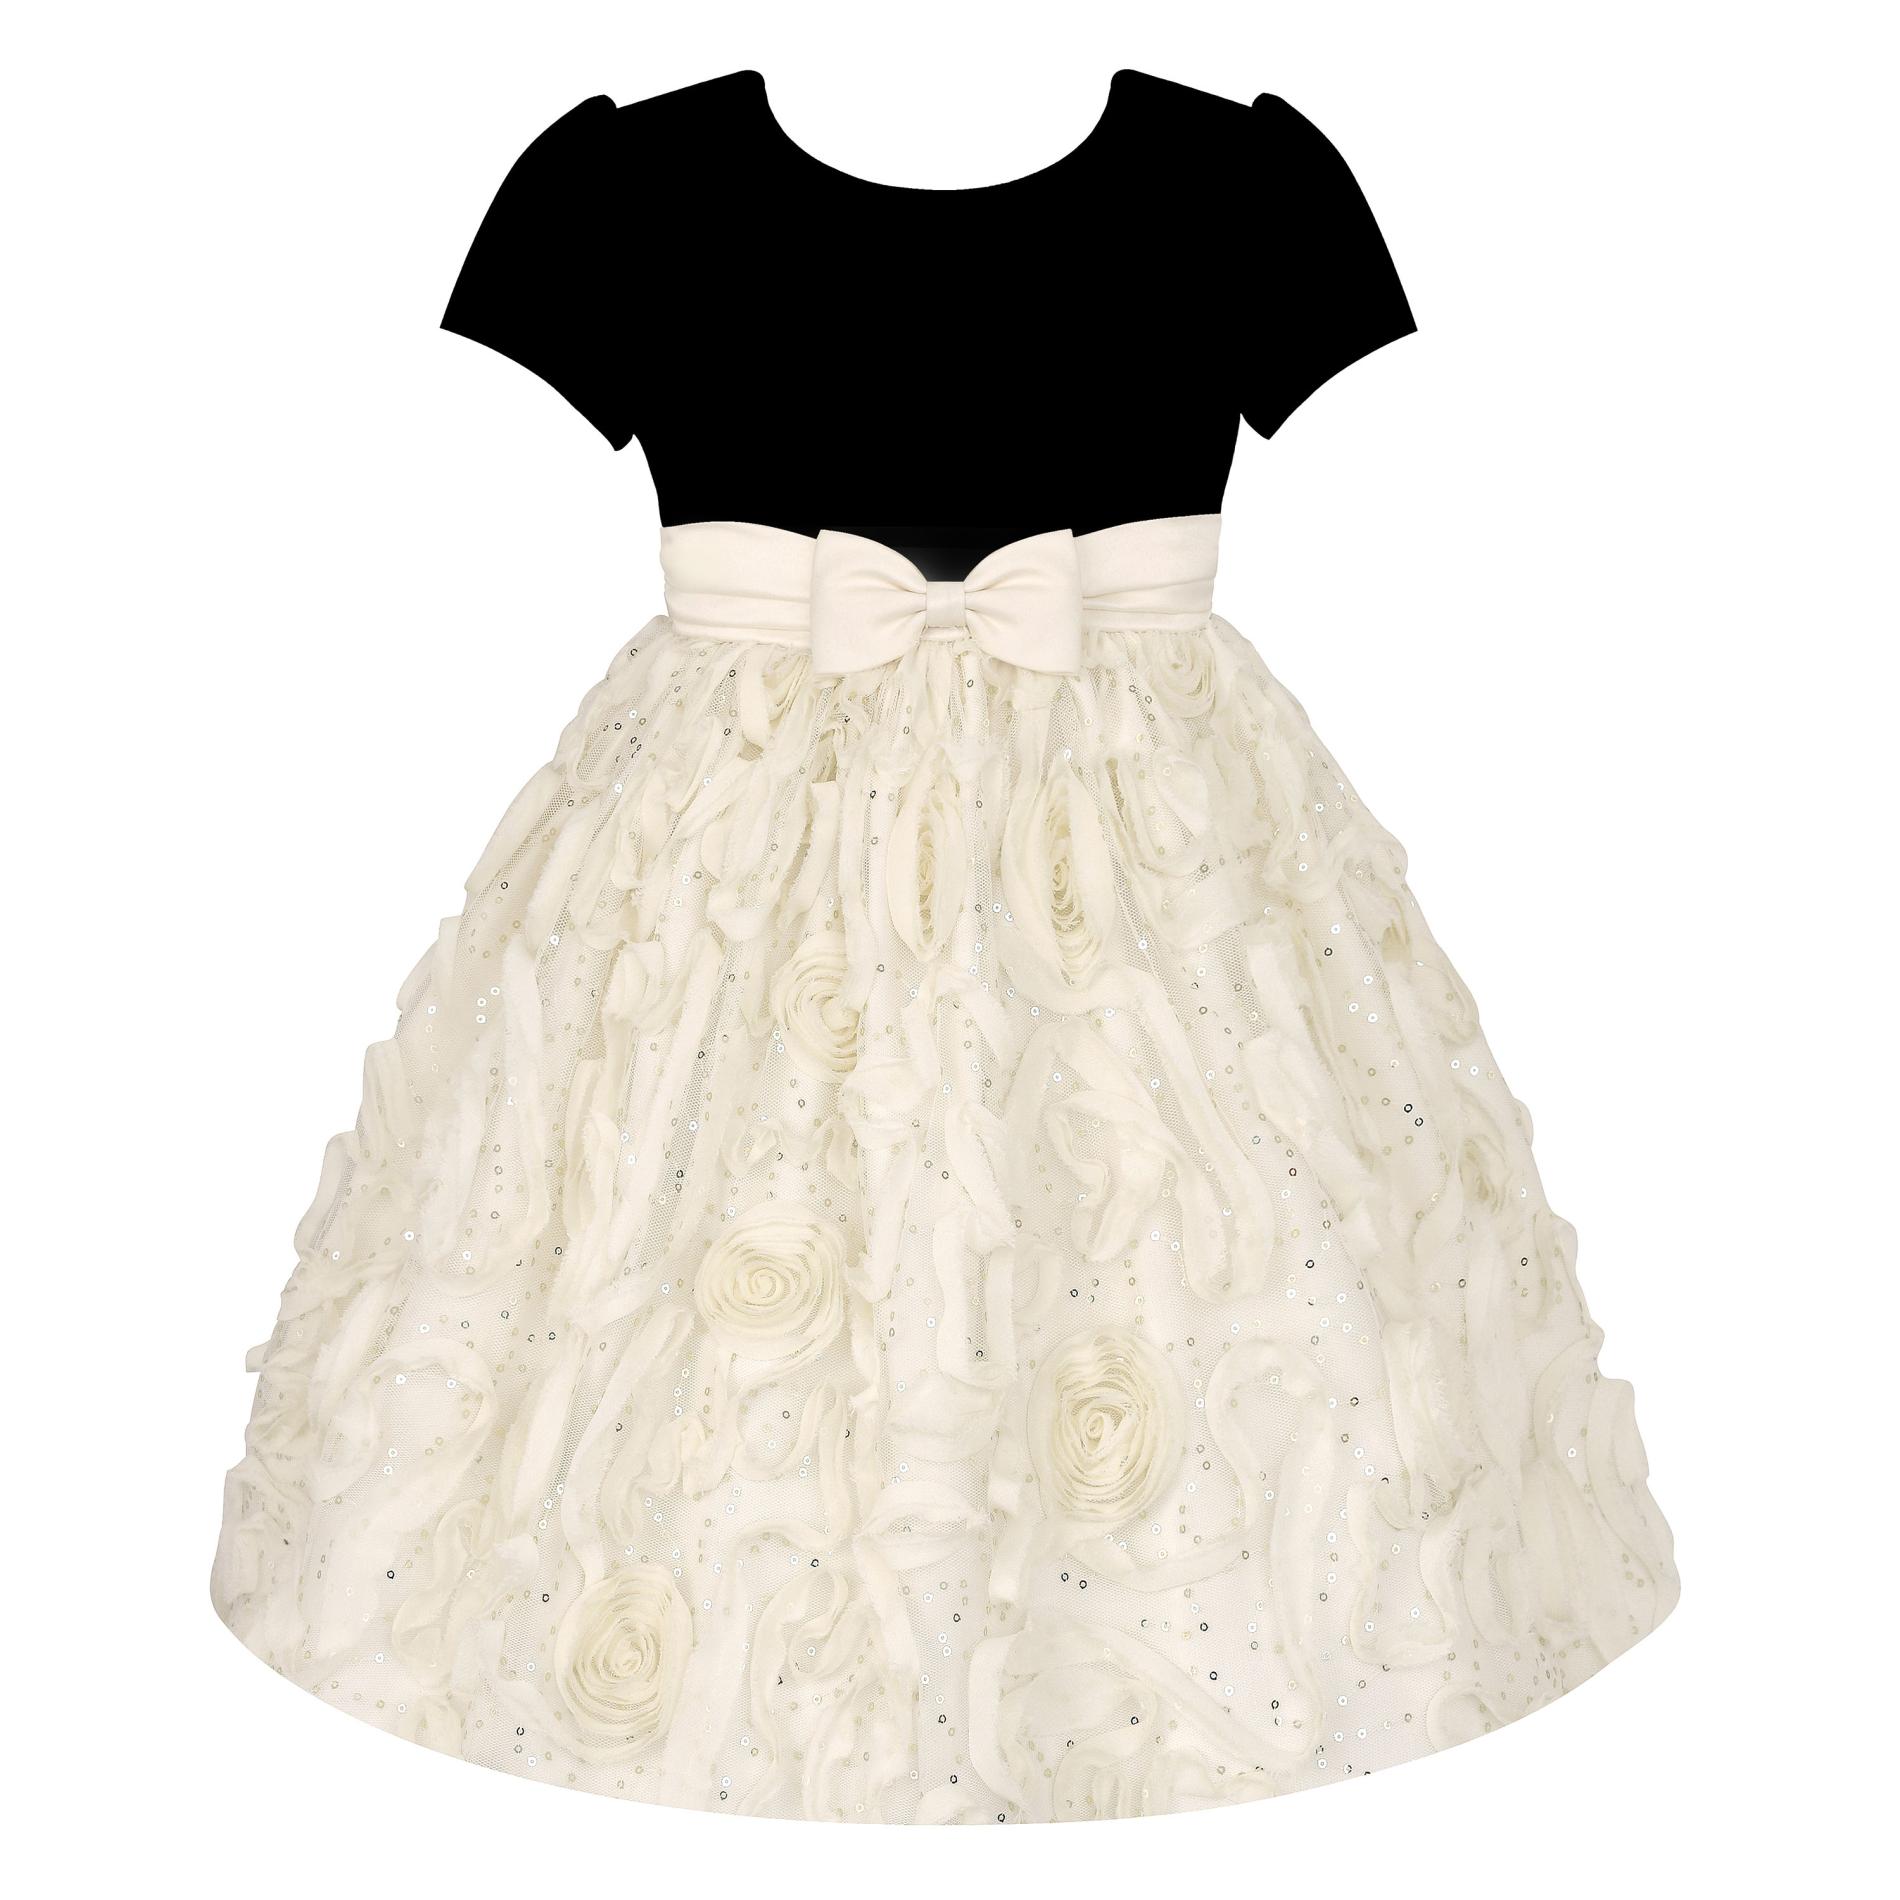 American Princess Girl's Embellished Party Dress